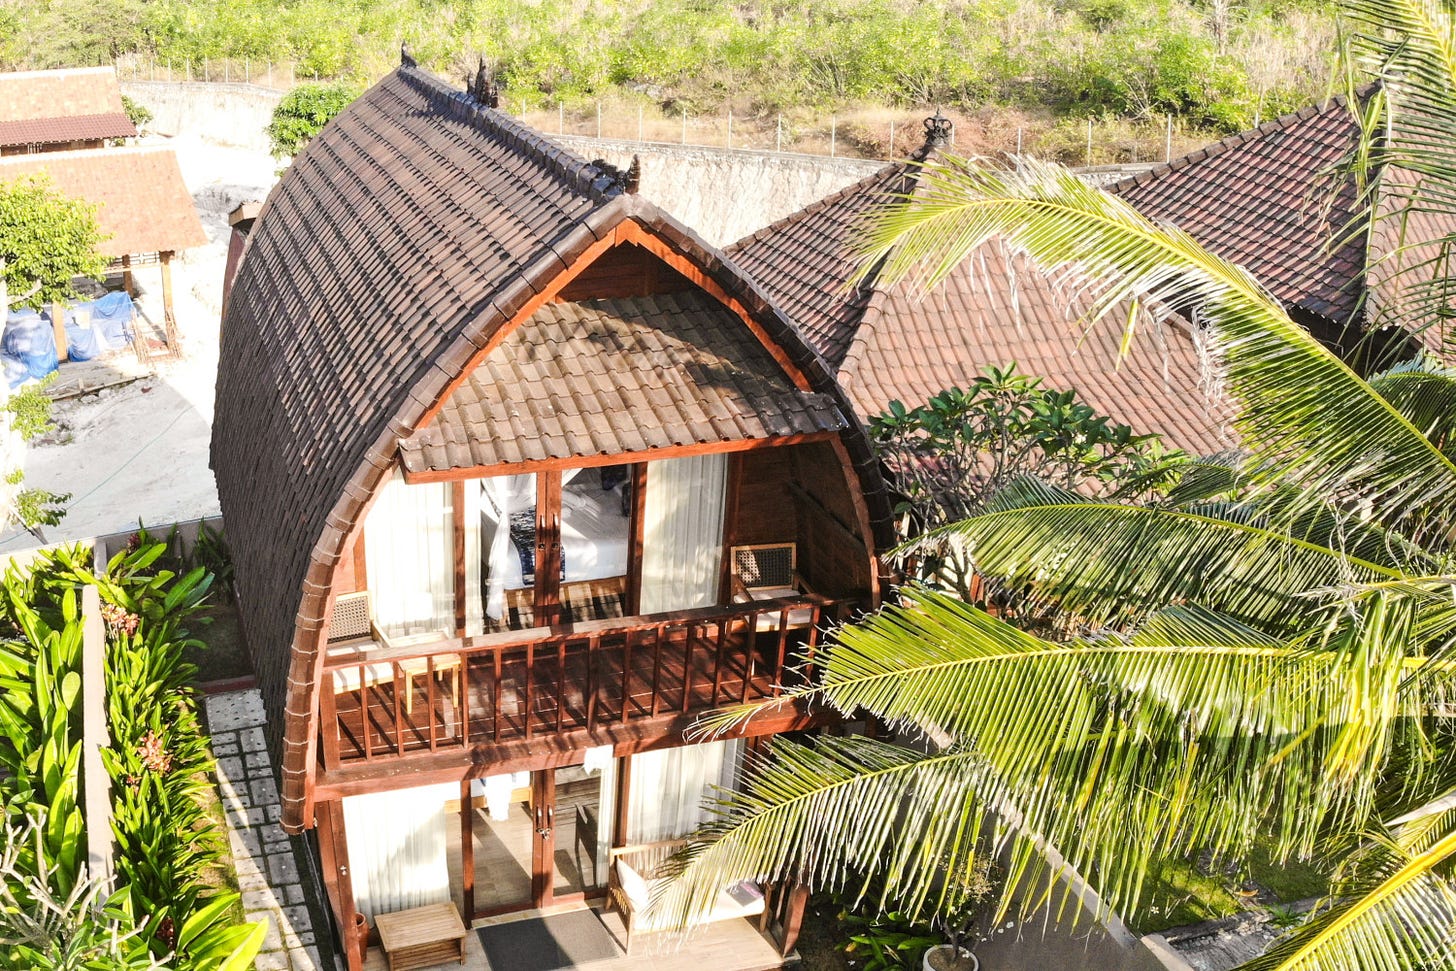 A two-story house in a tropical area